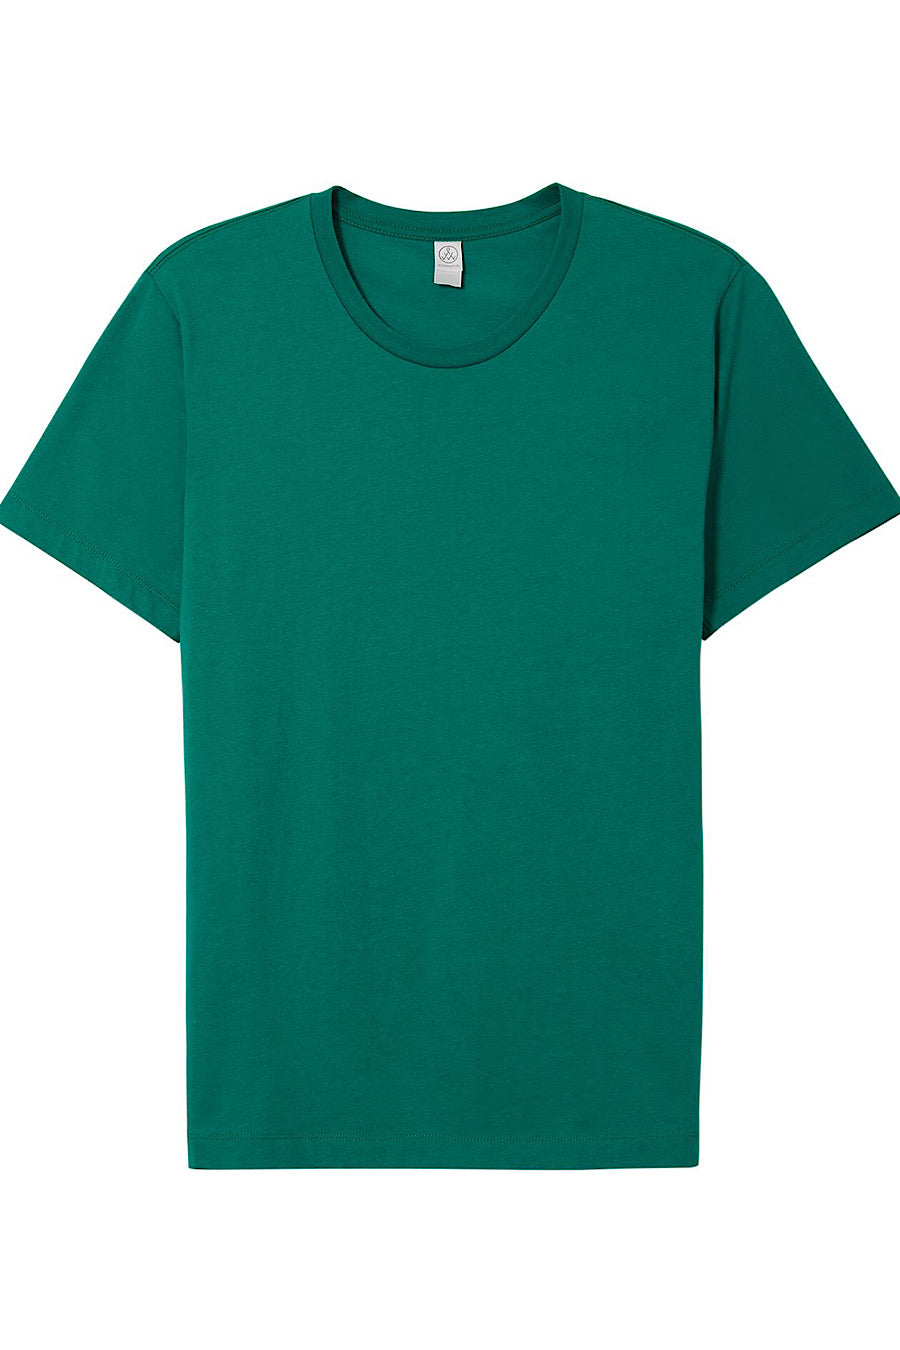 Go-To T-Shirt in Highlighter Green